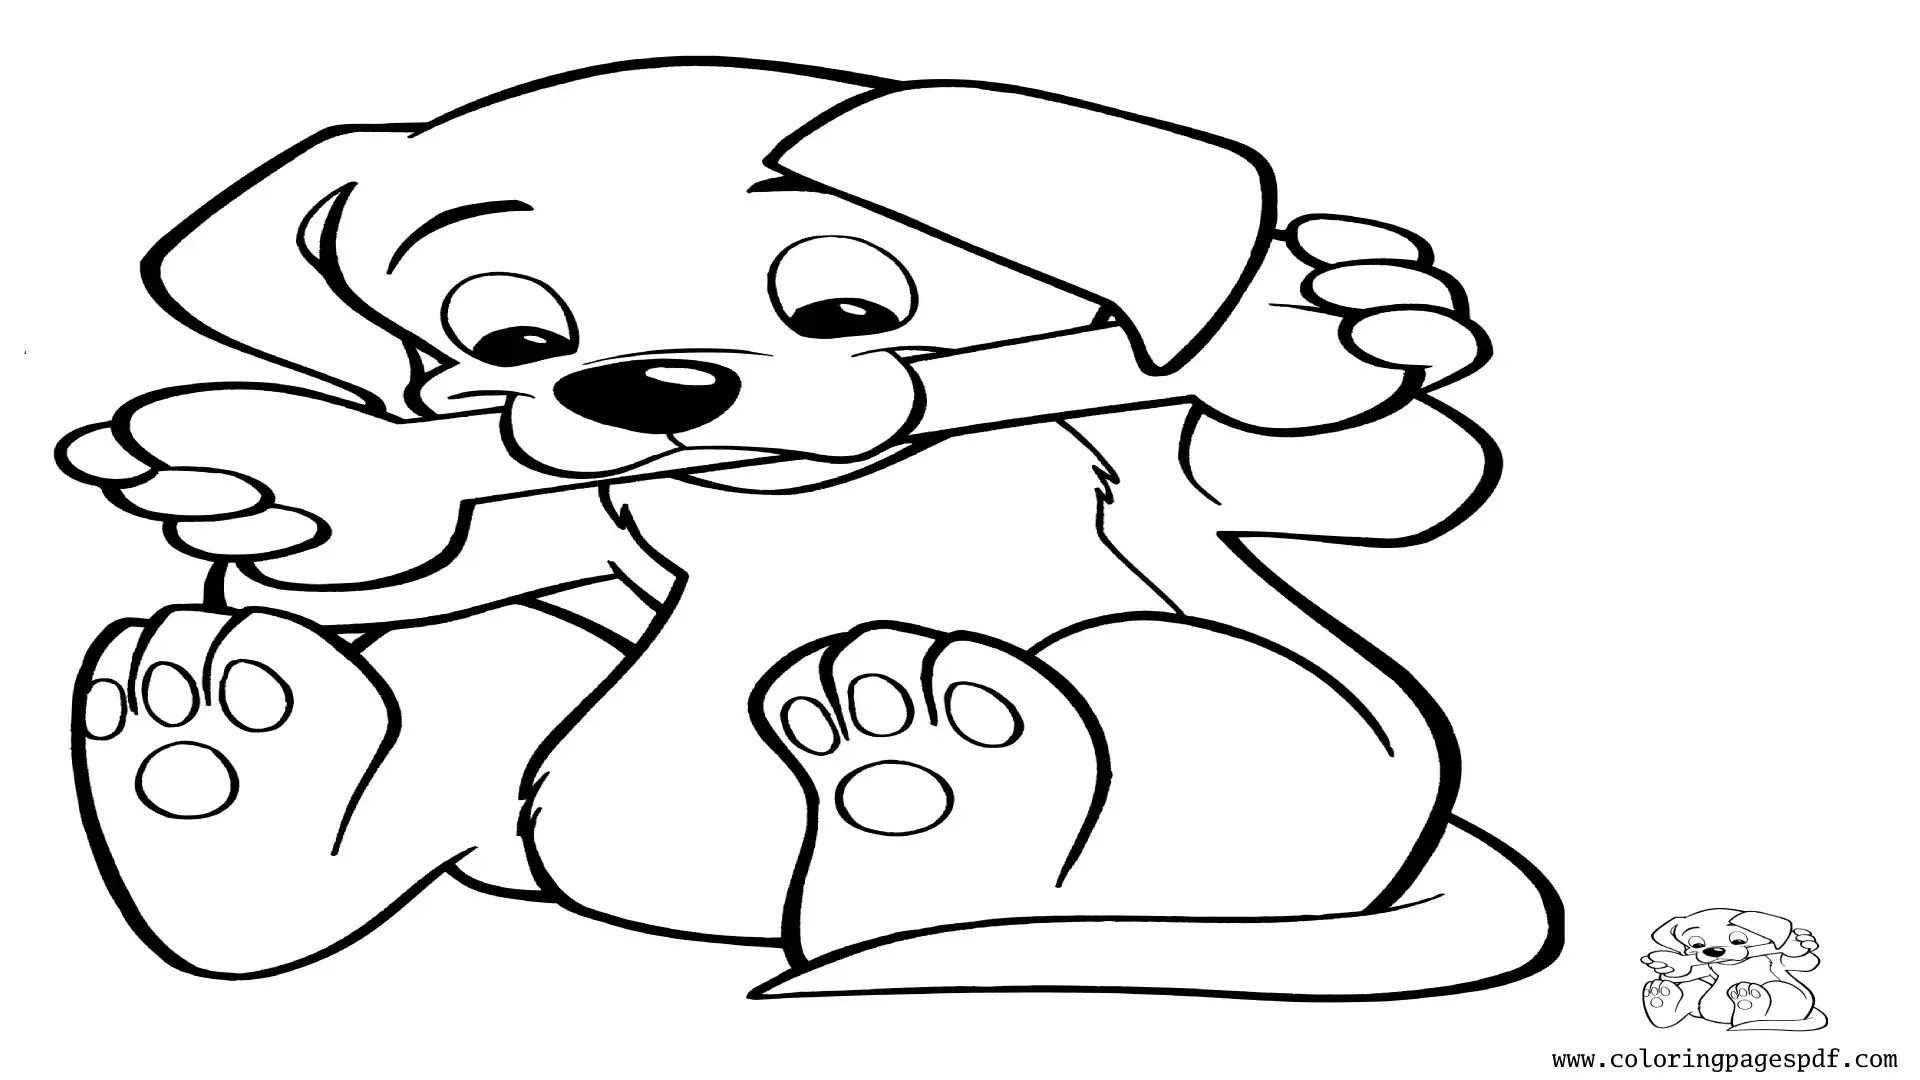 Coloring Pages Of A Puppy Chewing On A Bone